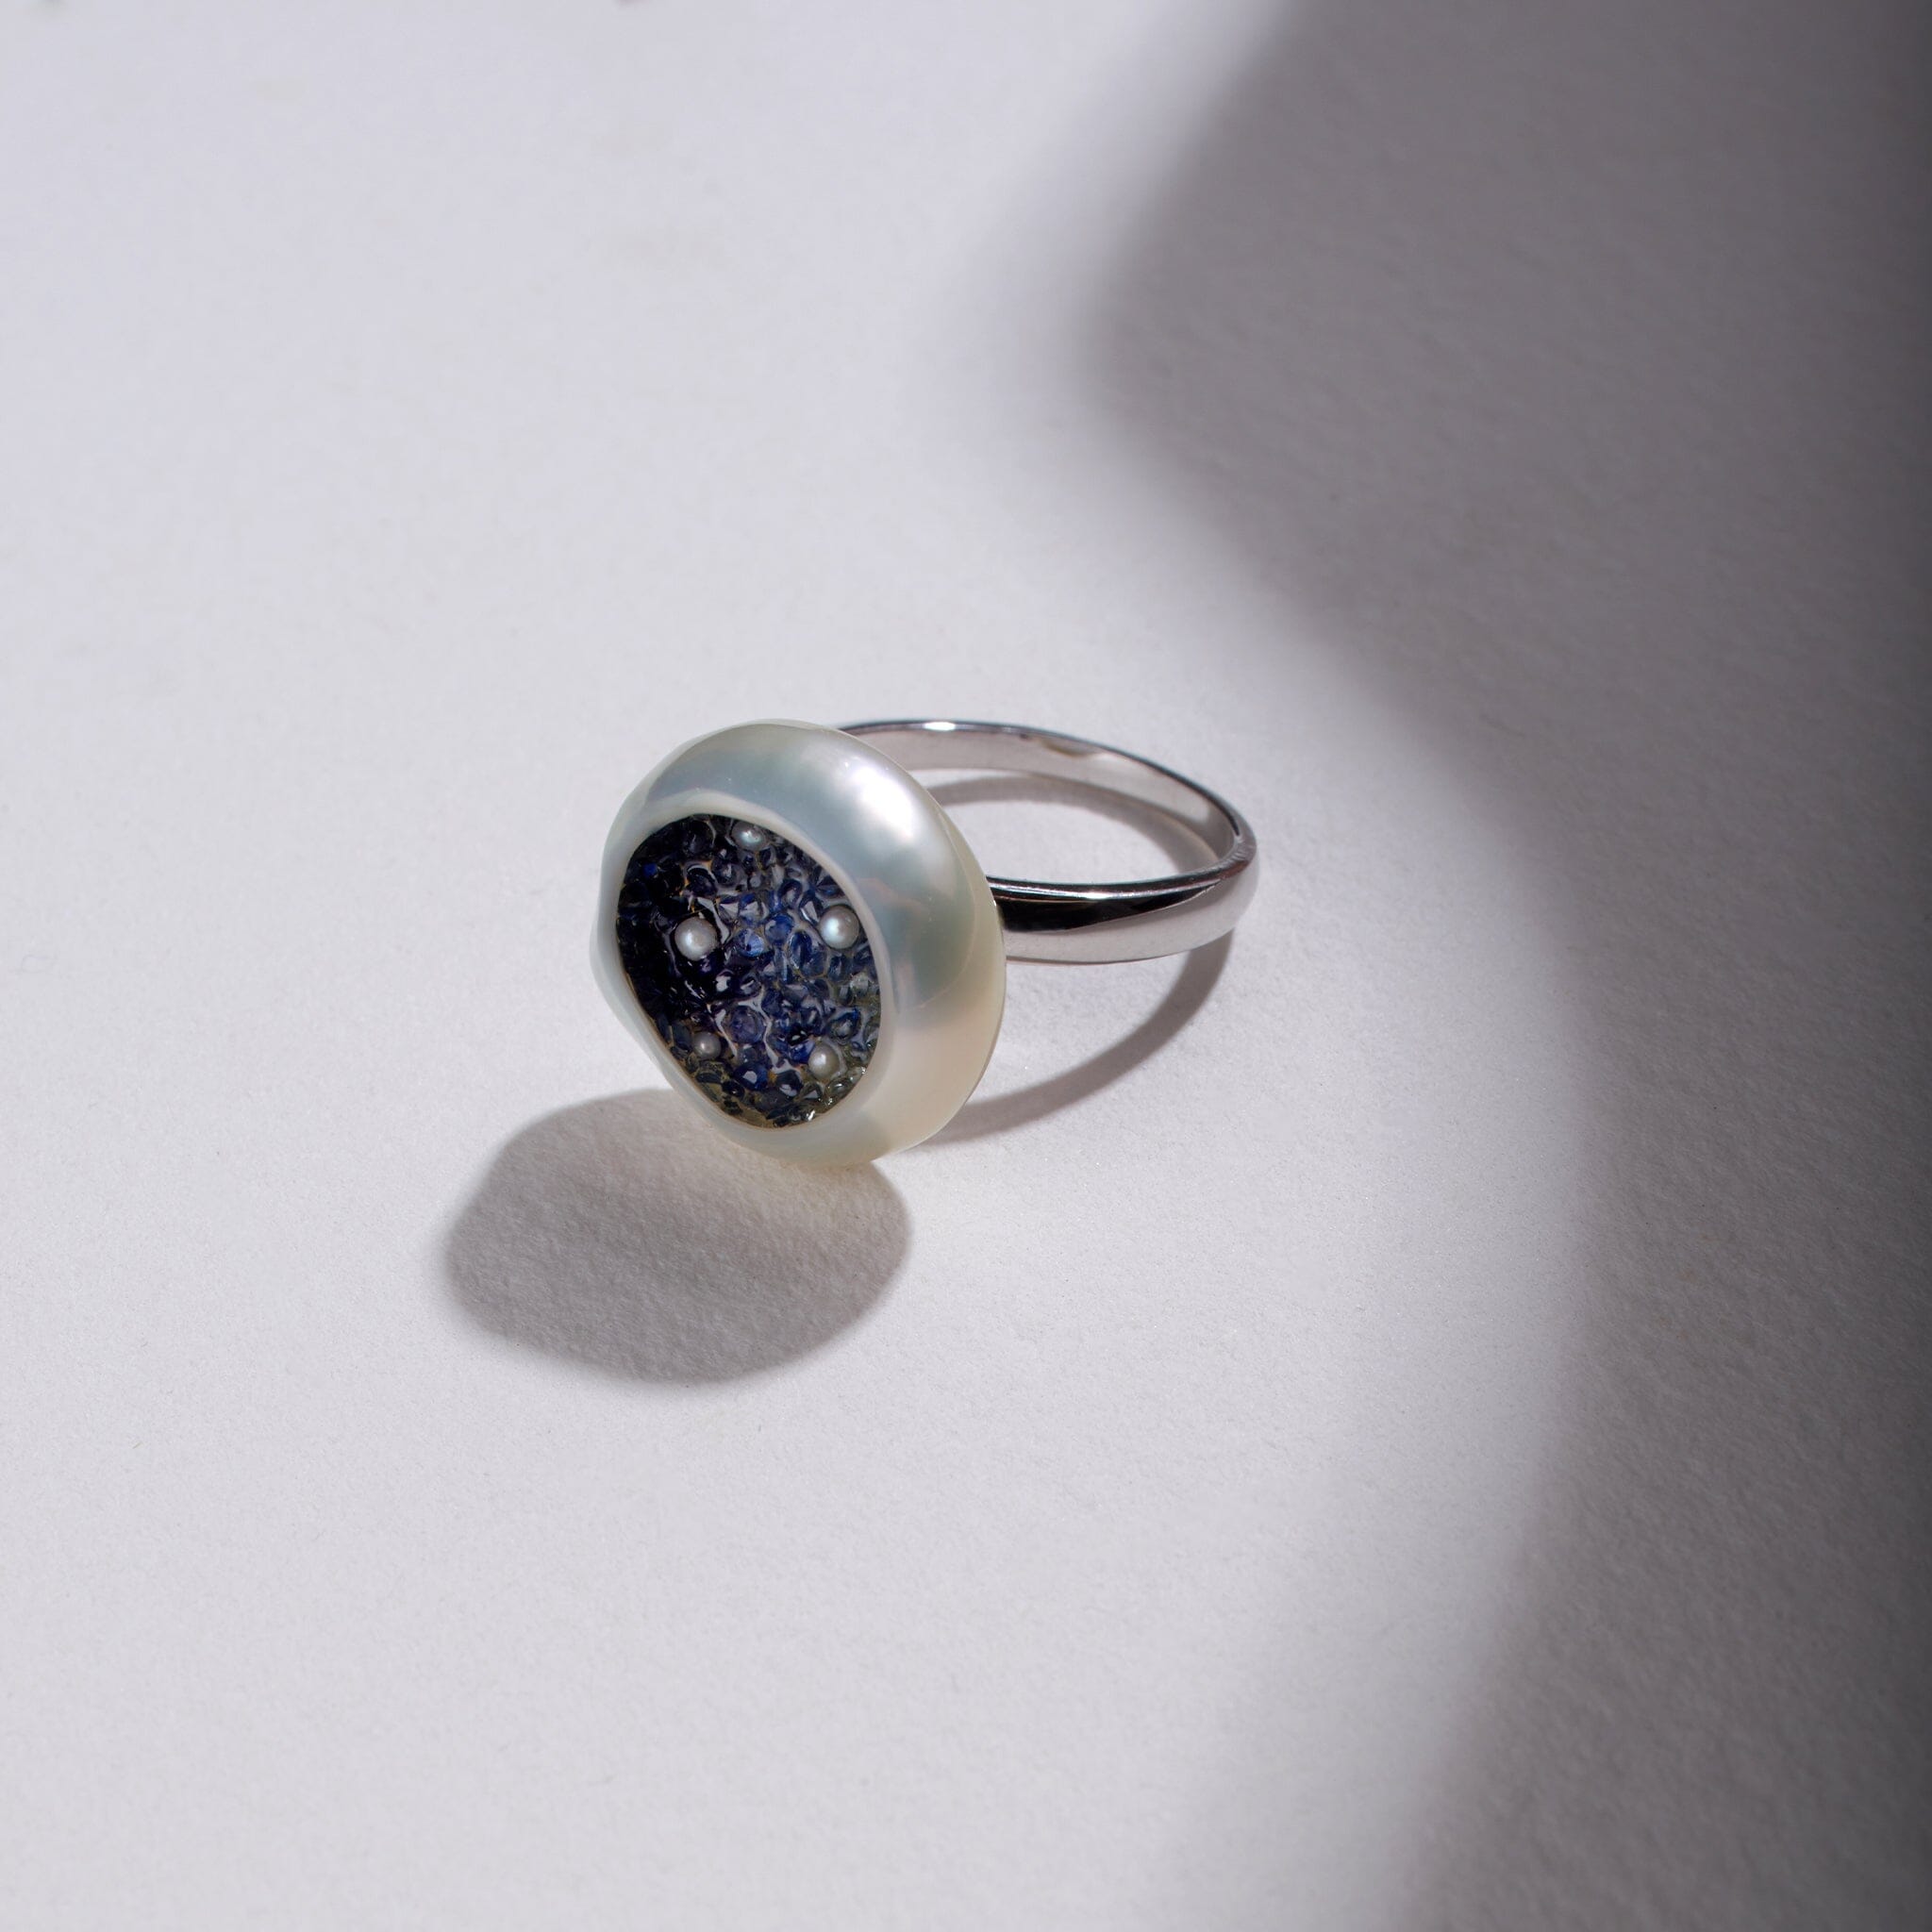 Freshwater Souffle Pearl Finestrino Ring with Blue Sapphire Ombre and Seed Pearls